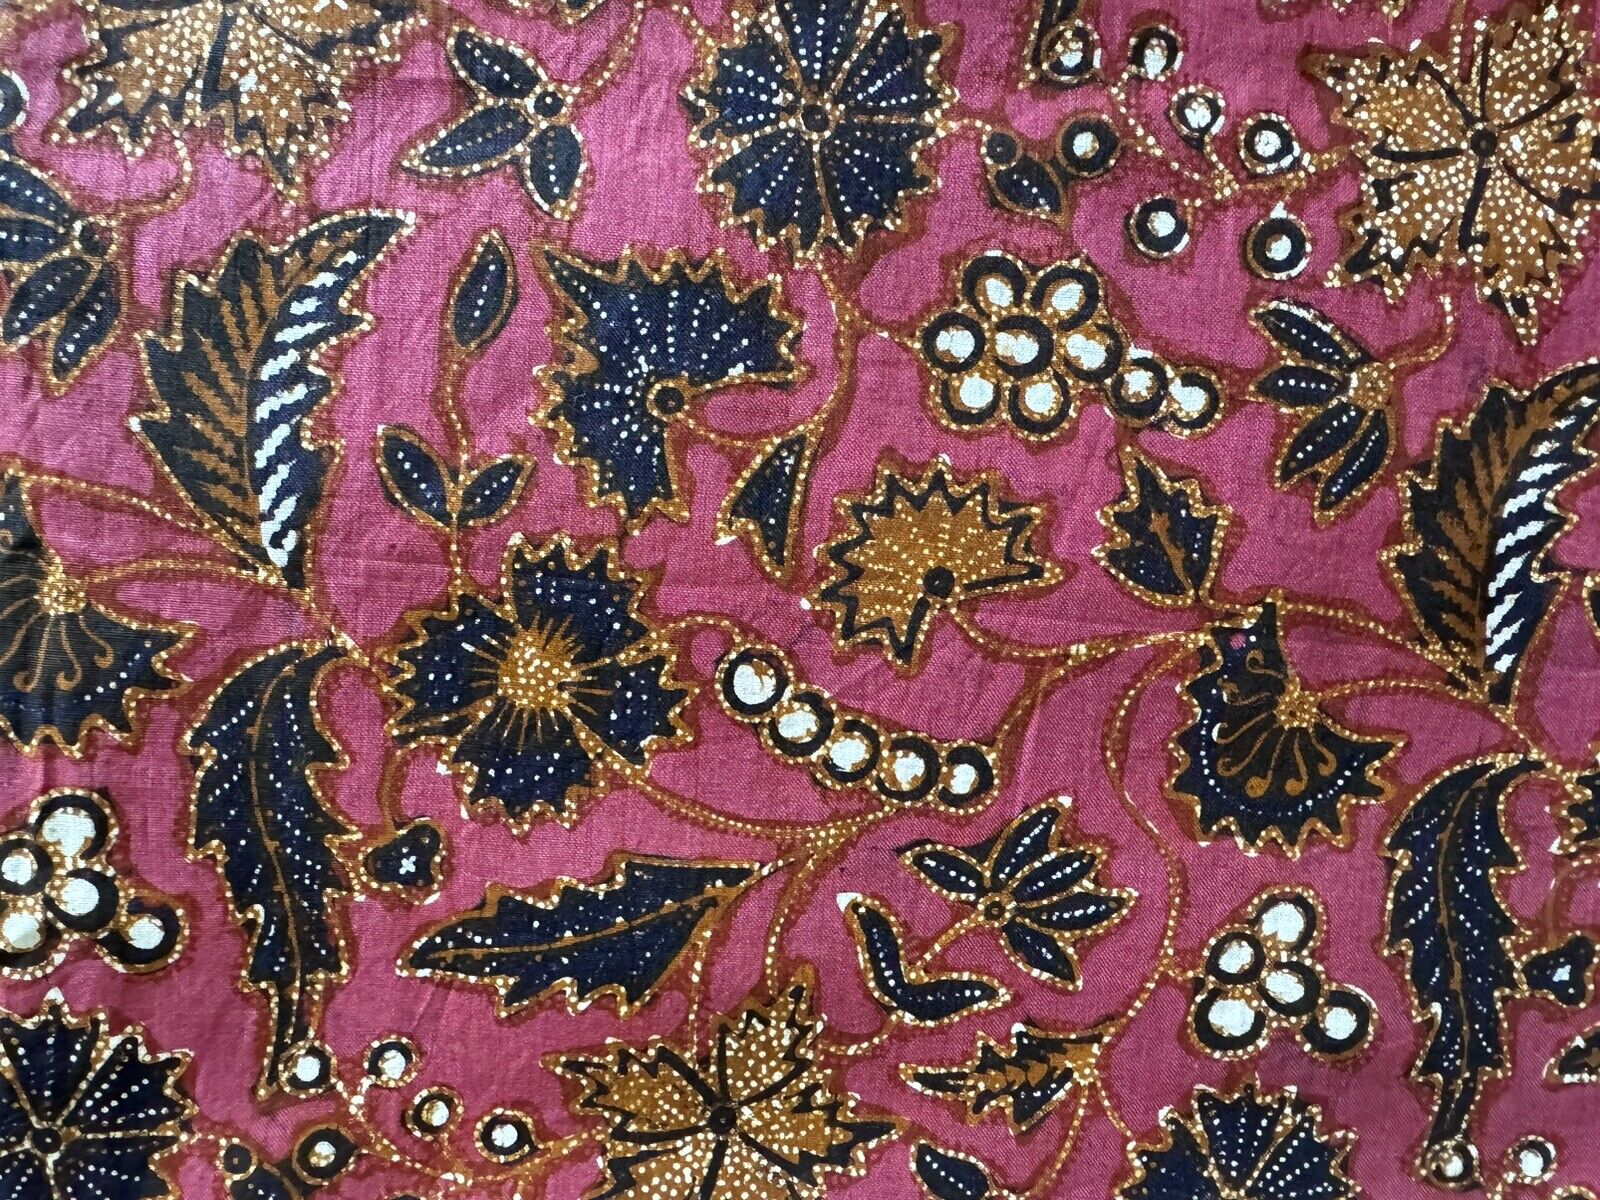 Cotton Batik Fabric 88x40 (2.4 yards) Made and Purchased in Thailand Vintage